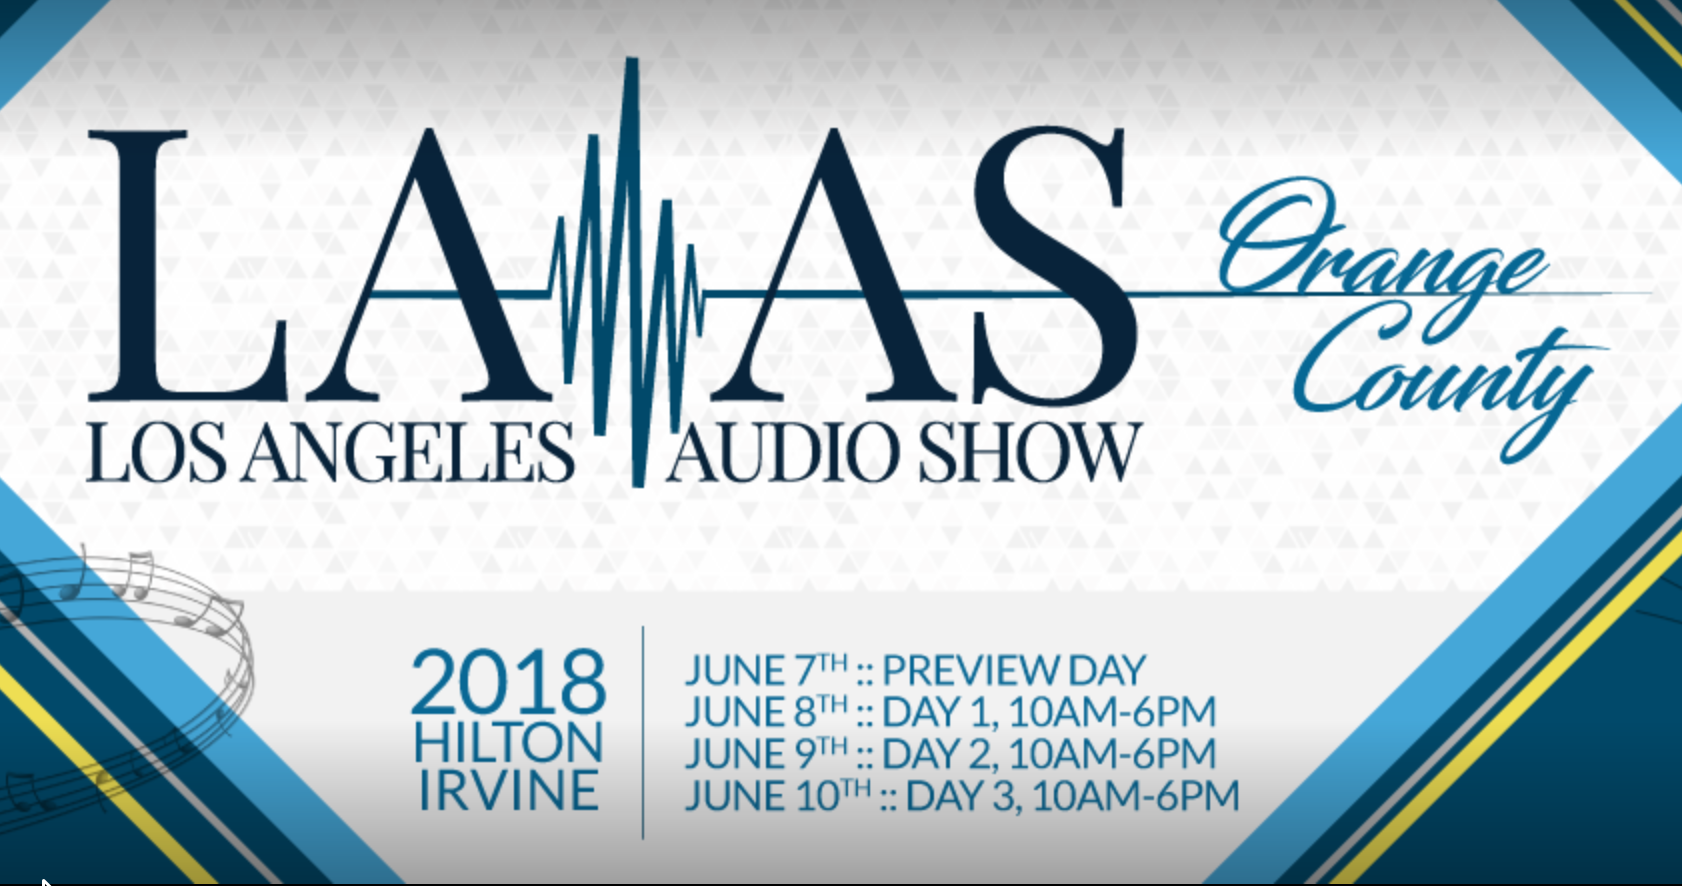 Los Angeles Audio Show 2018 Cancelled